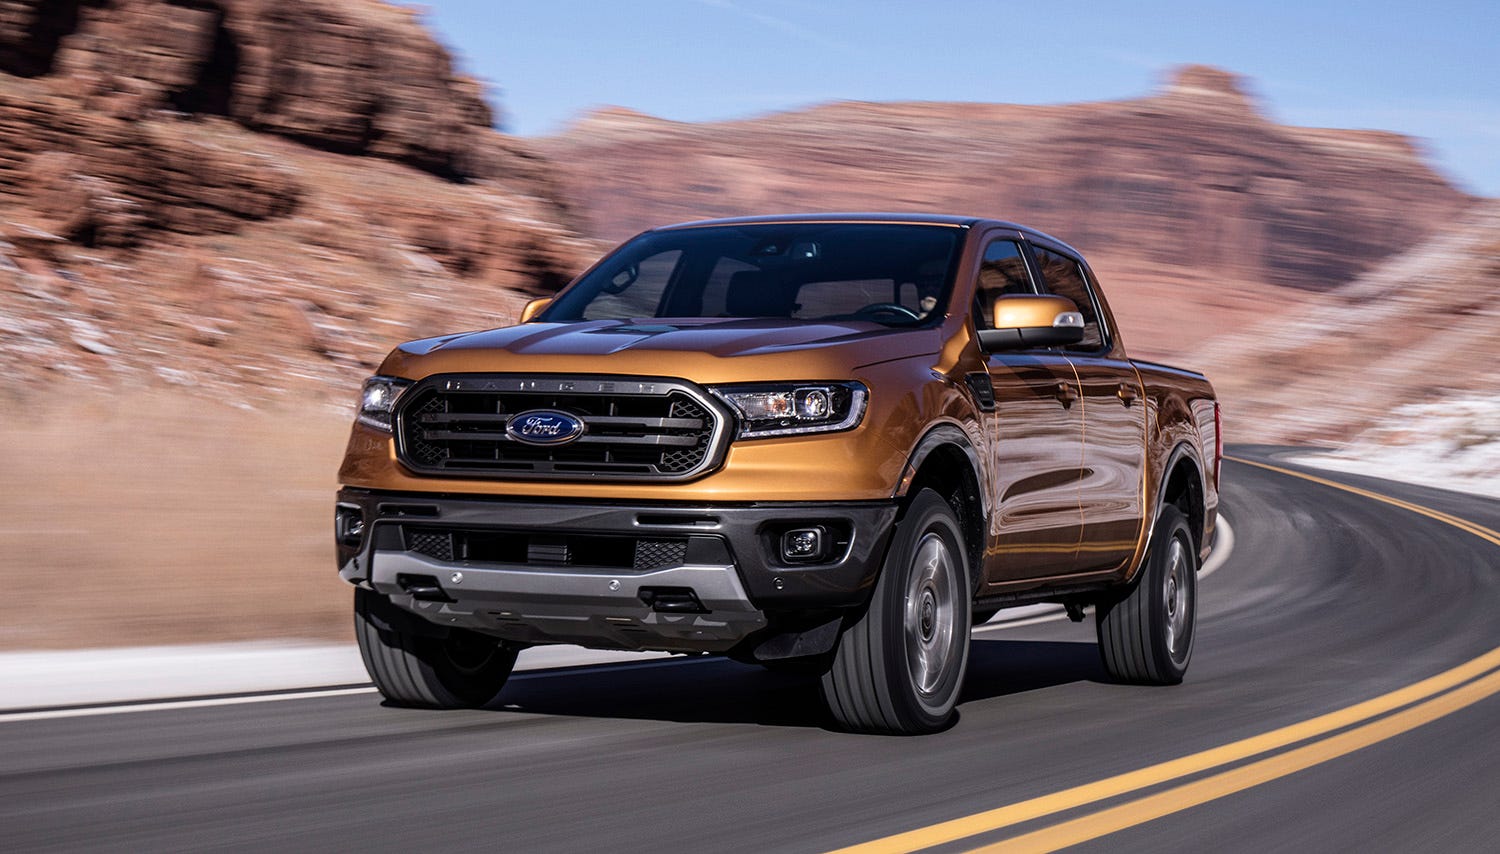 The 2019 Ford Ranger currently boasts a best-in-class EPA-estimated 23-miles-per-gallon combined fuel economy.